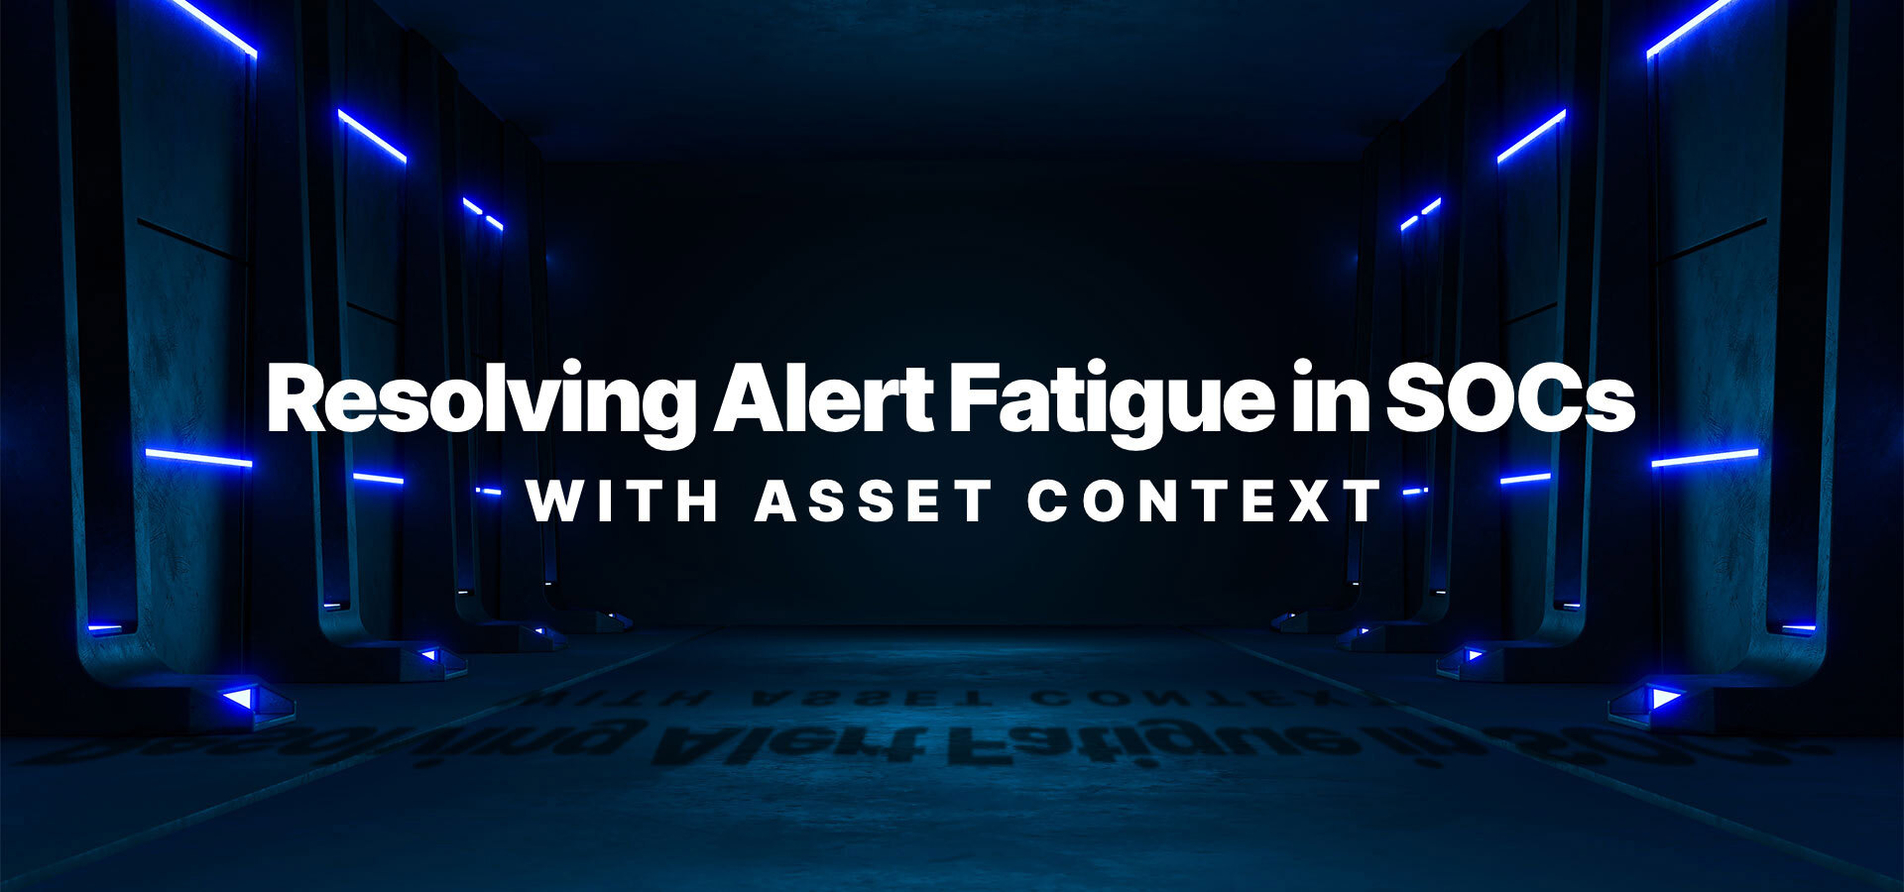 Resolving Alert Fatigue in SOCs with Asset Context for Incident Evaluation.